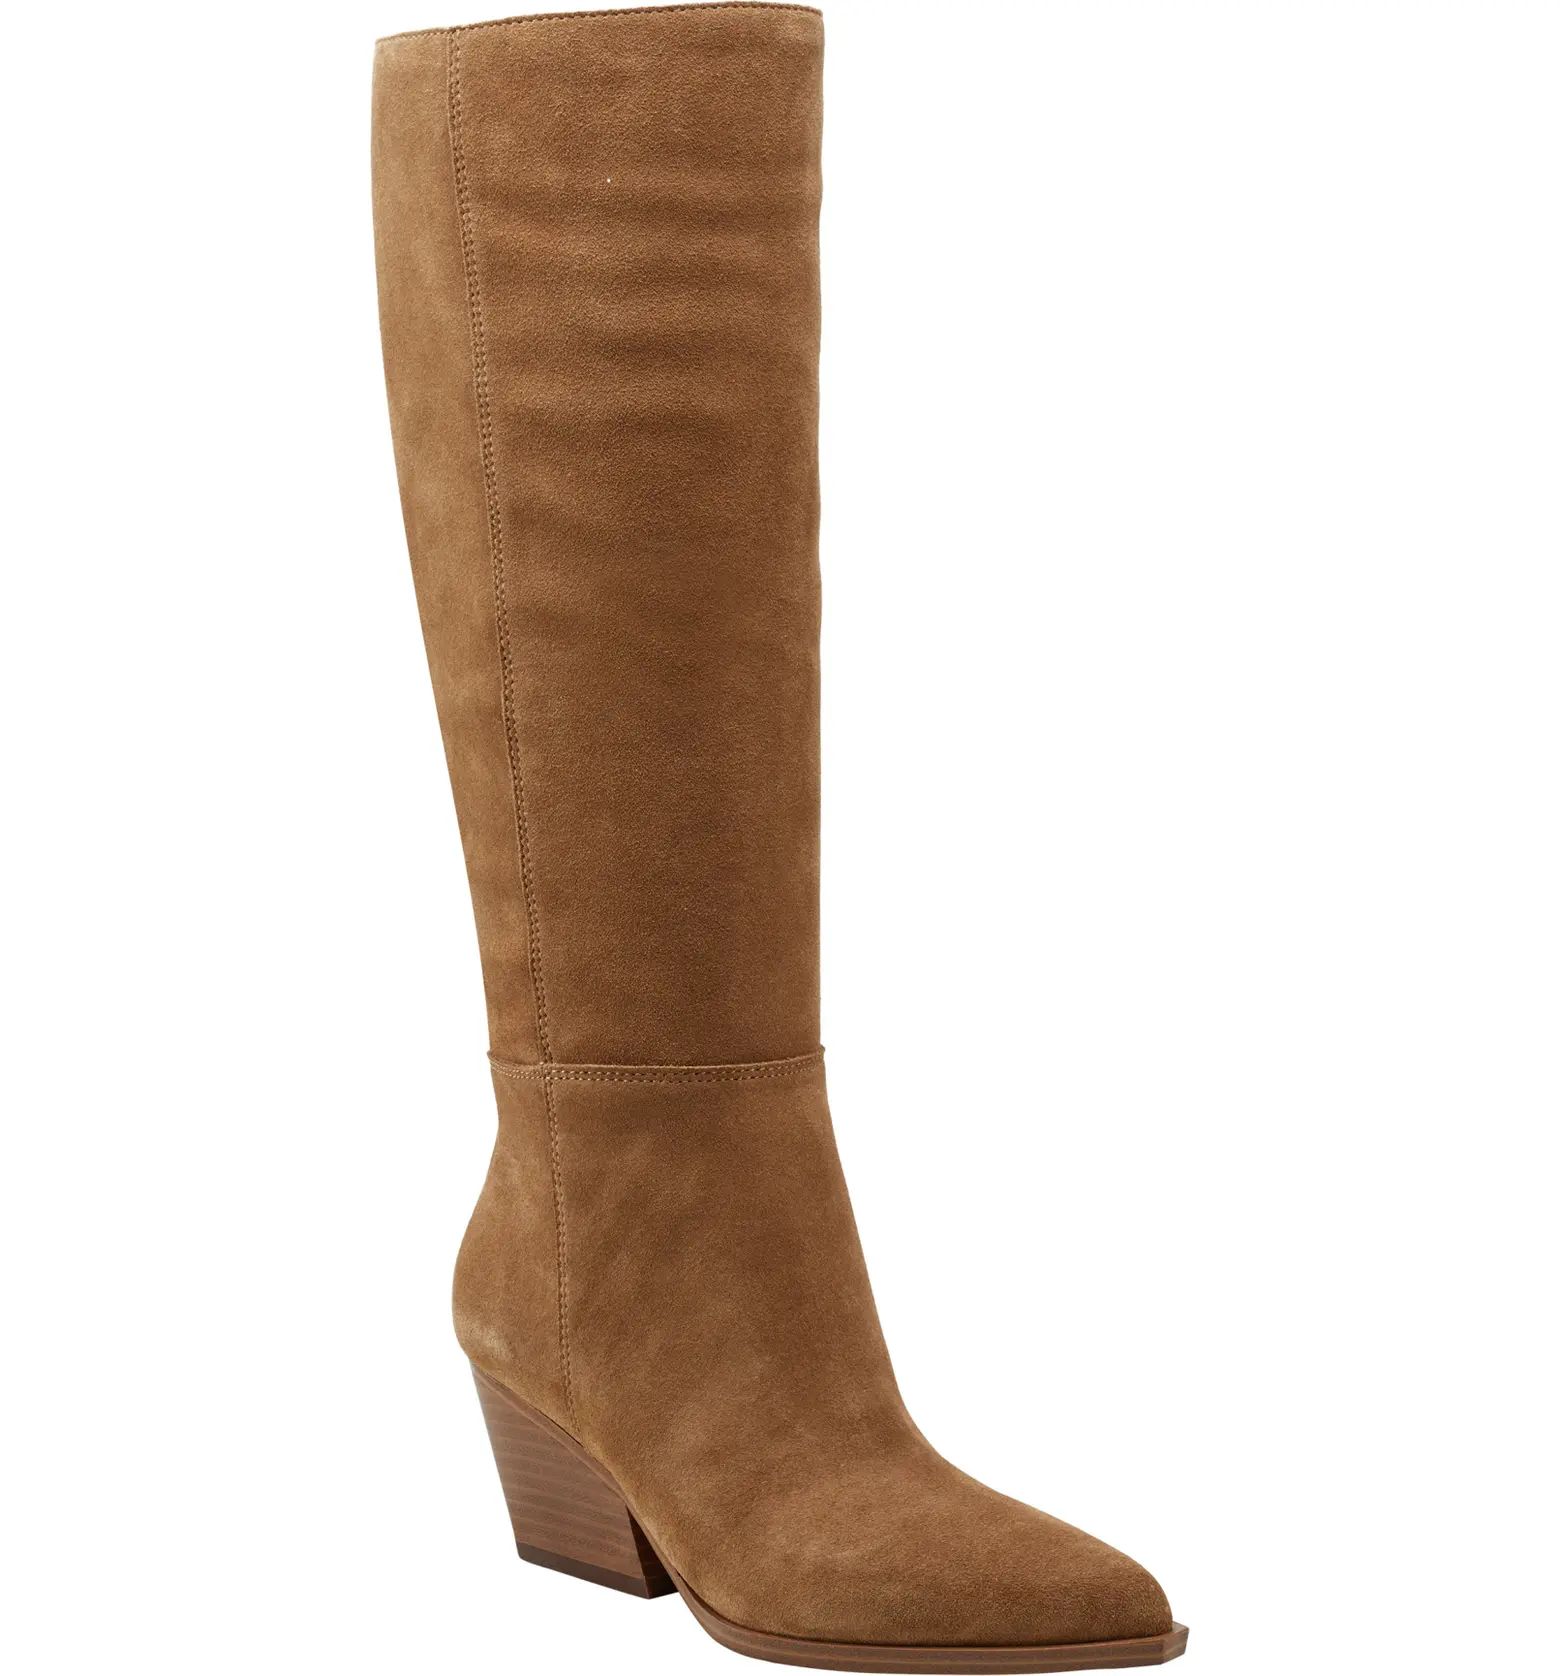 Challi Pointed Toe Knee High Boot (Women) | Nordstrom